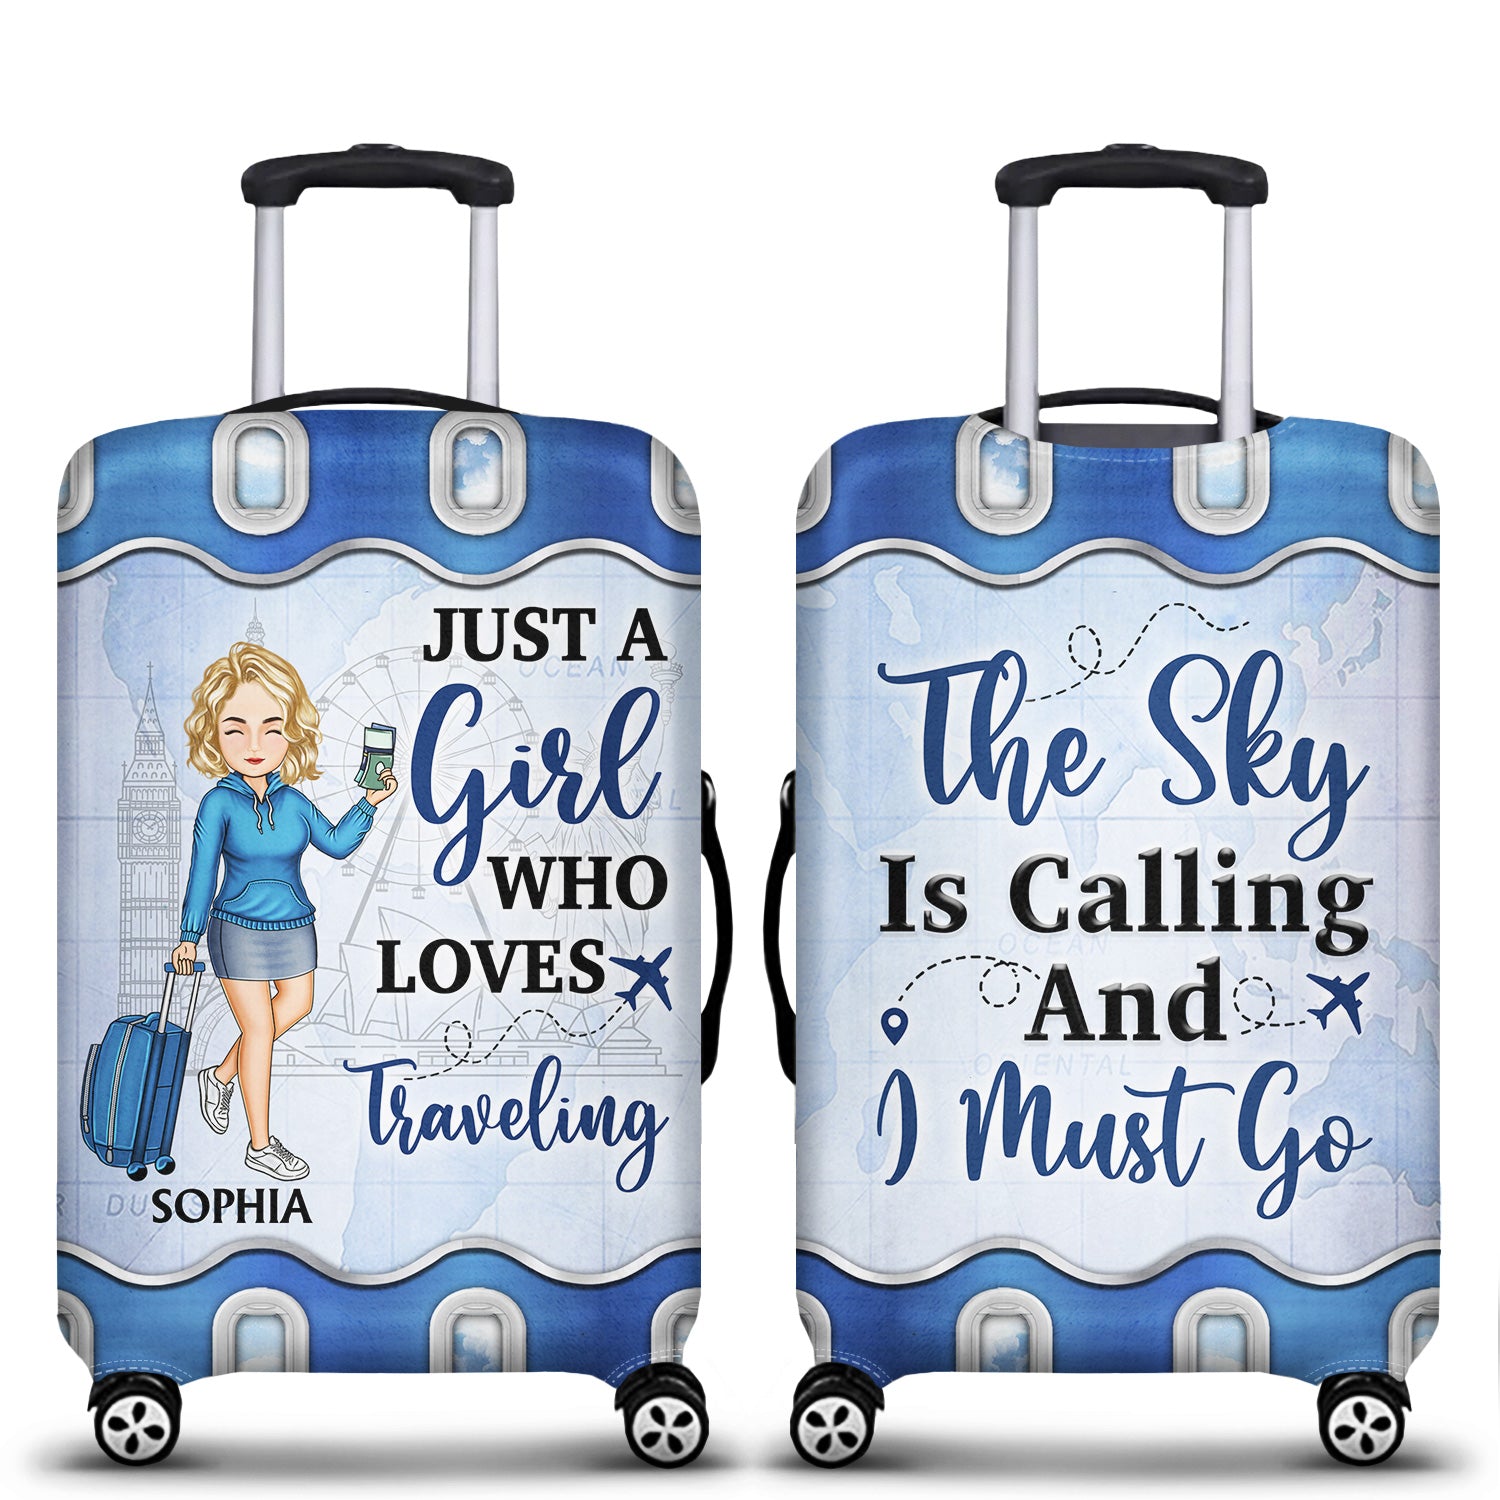 Just A Girl Boy Who Loves Traveling Cruising - Birthday Gift For Him, Her, Kid, Friends, Family, Trippin', Vacation Lovers - Personalized Custom Luggage Cover